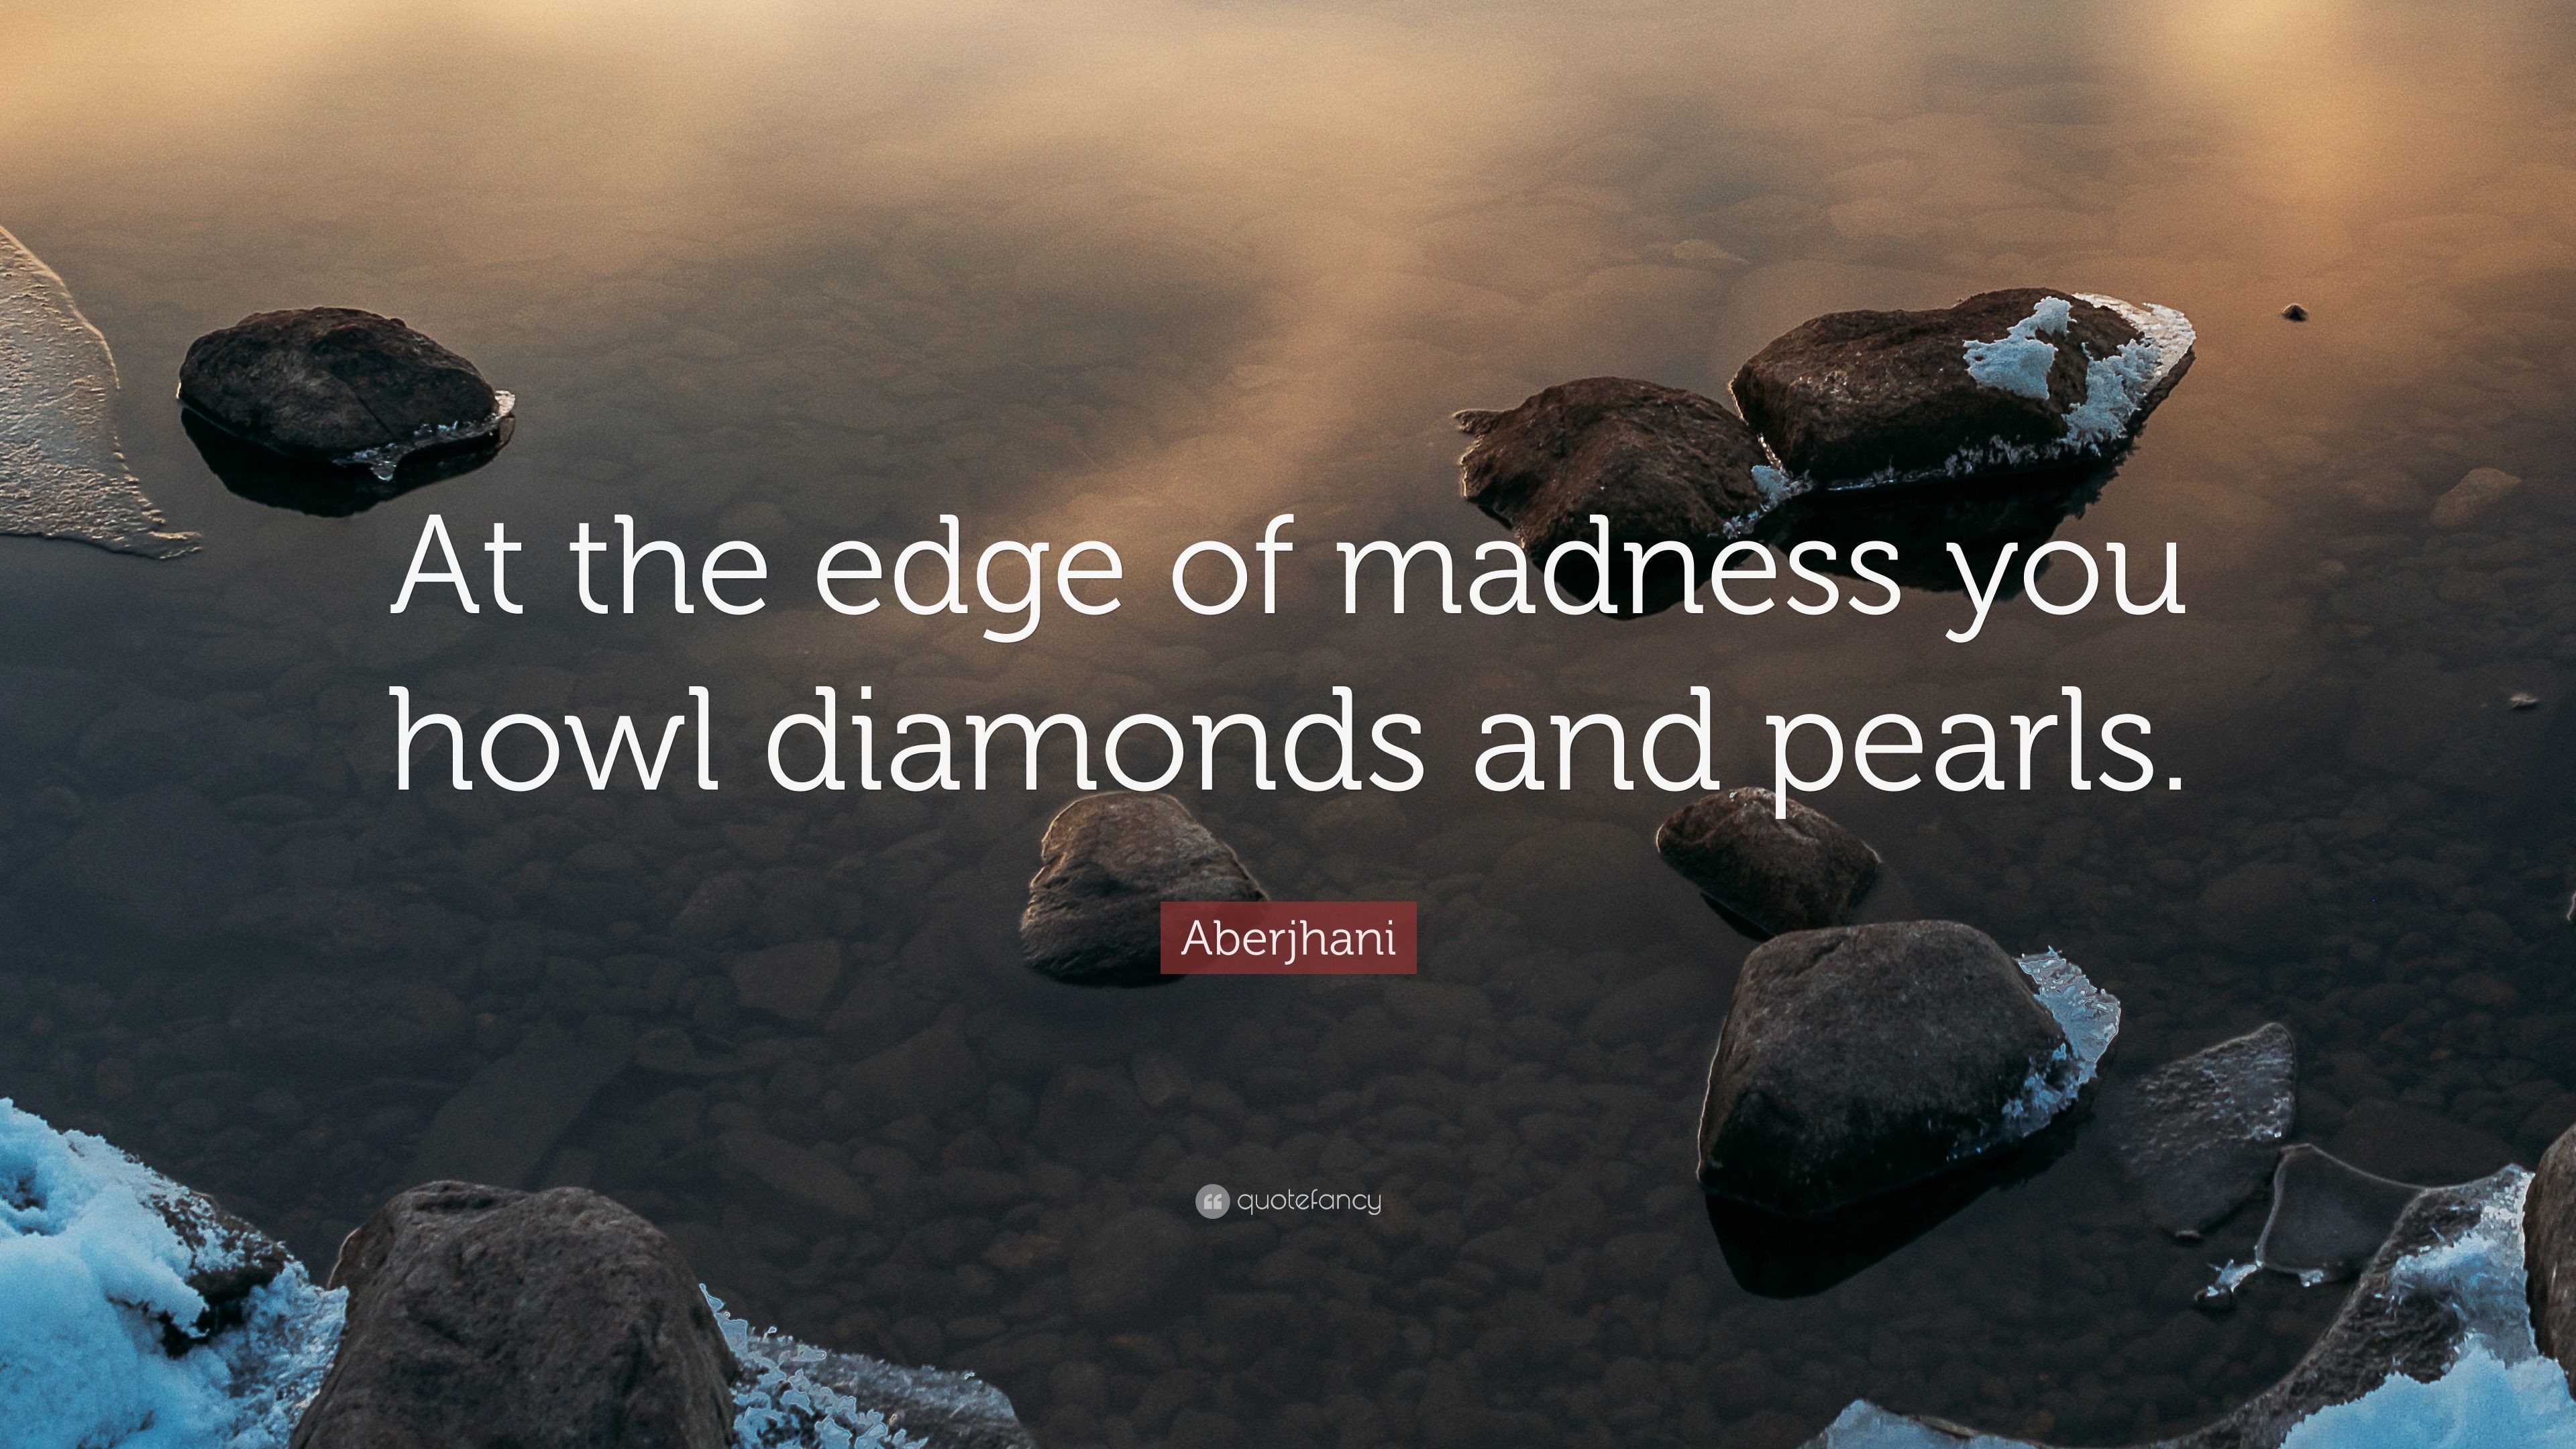 3840x2160 Aberjhani Quote: "At the edge of madness you howl diamonds a...